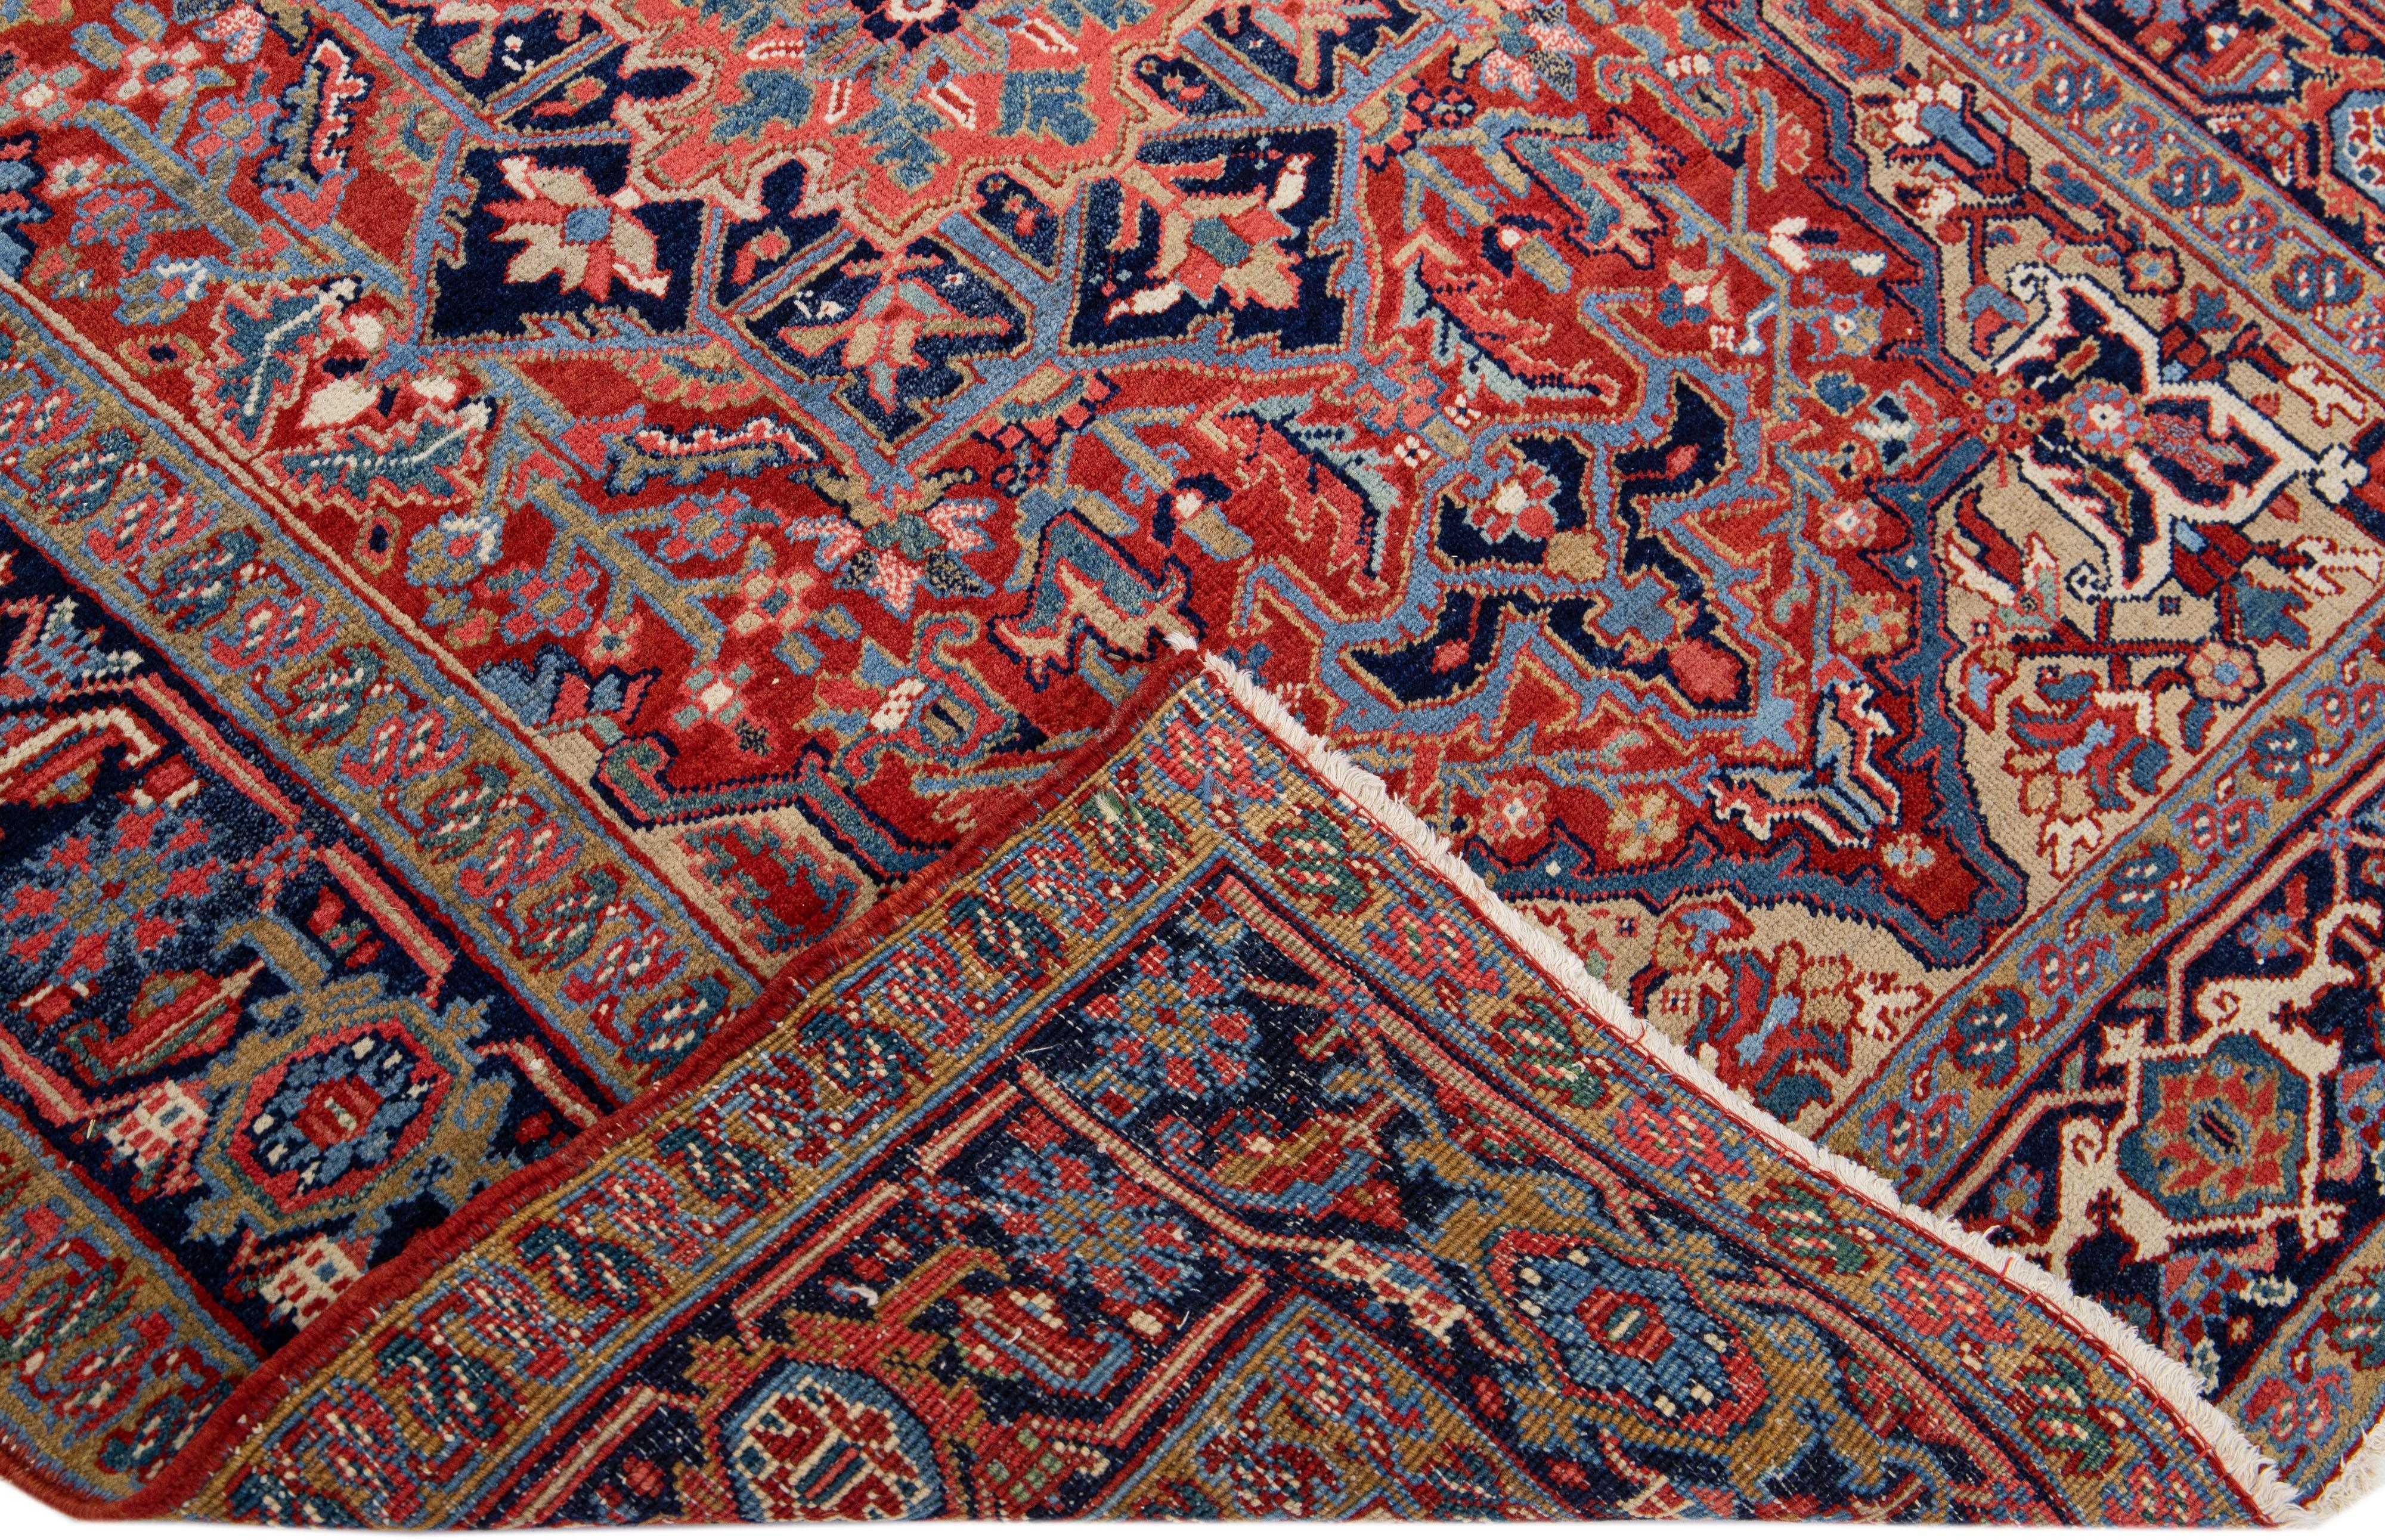 Beautiful antique Heriz hand-knotted wool rug with a red color field. This Persian rug has multicolor accents in a gorgeous medallion floral design.

This rug measures: 4'11